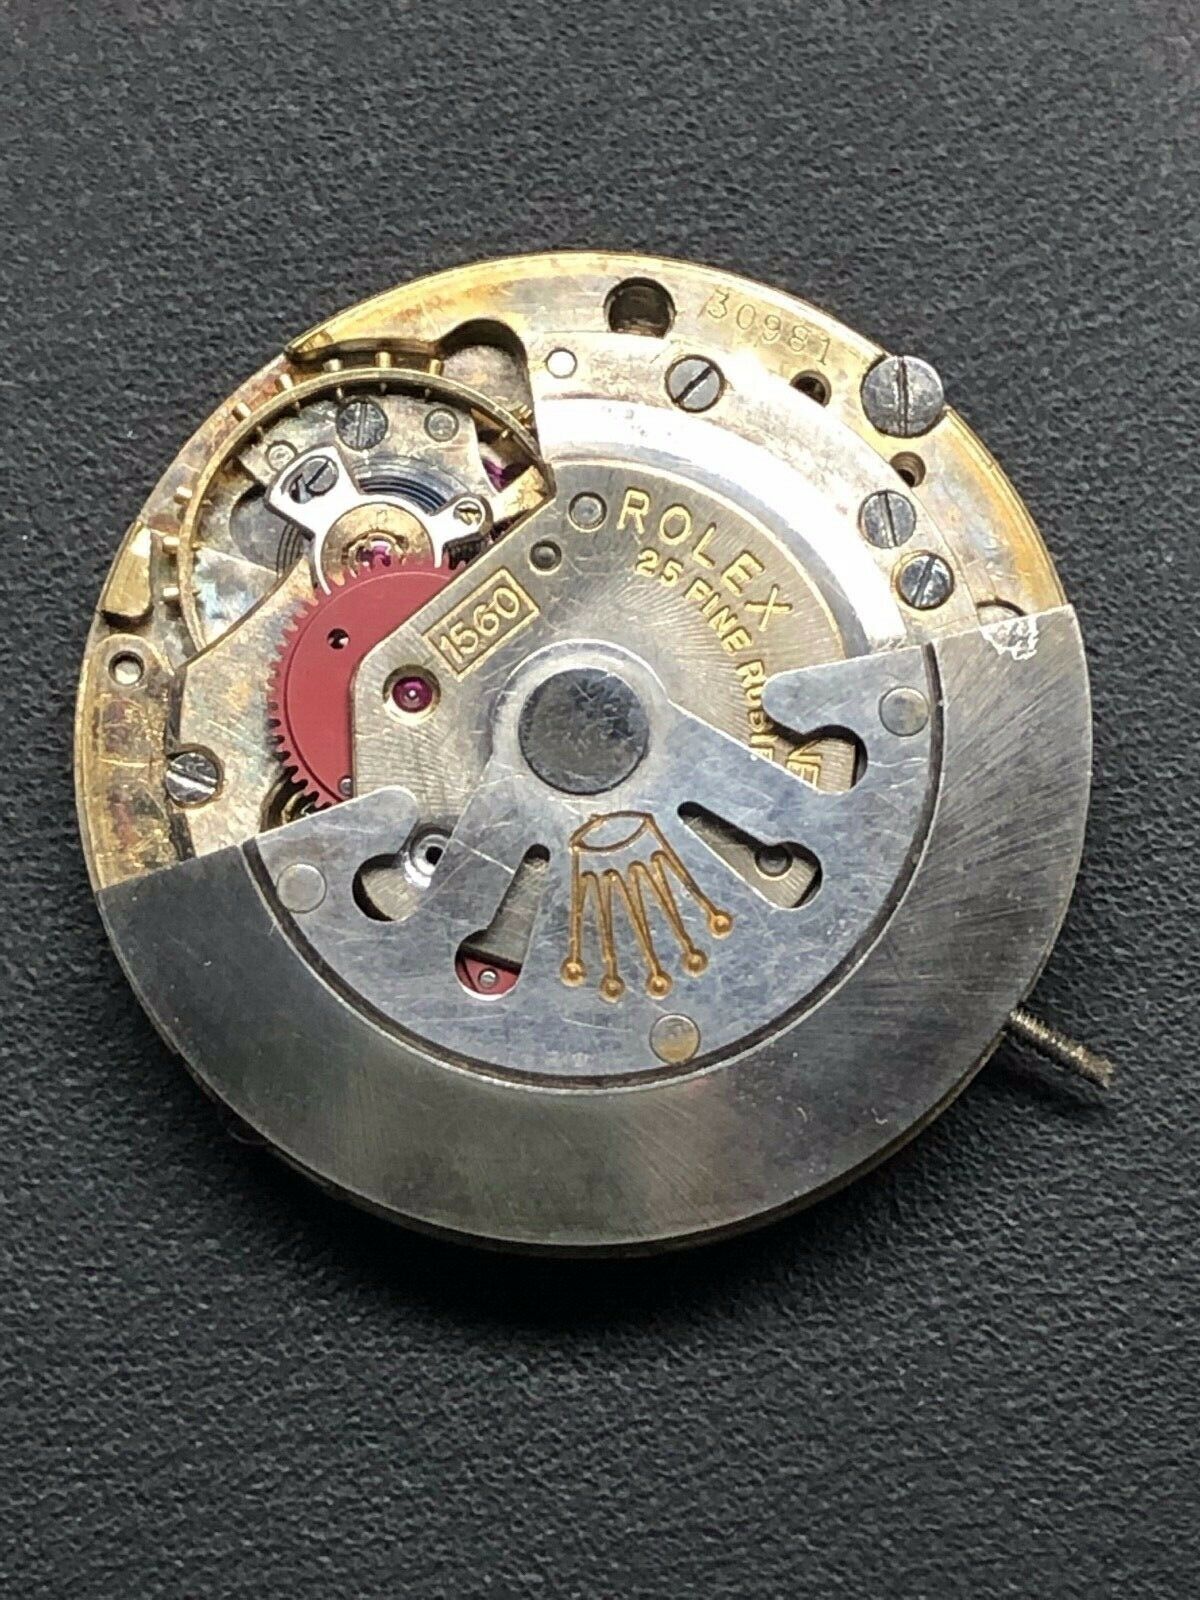 Rolex 1560 Automatic Movement With Date 